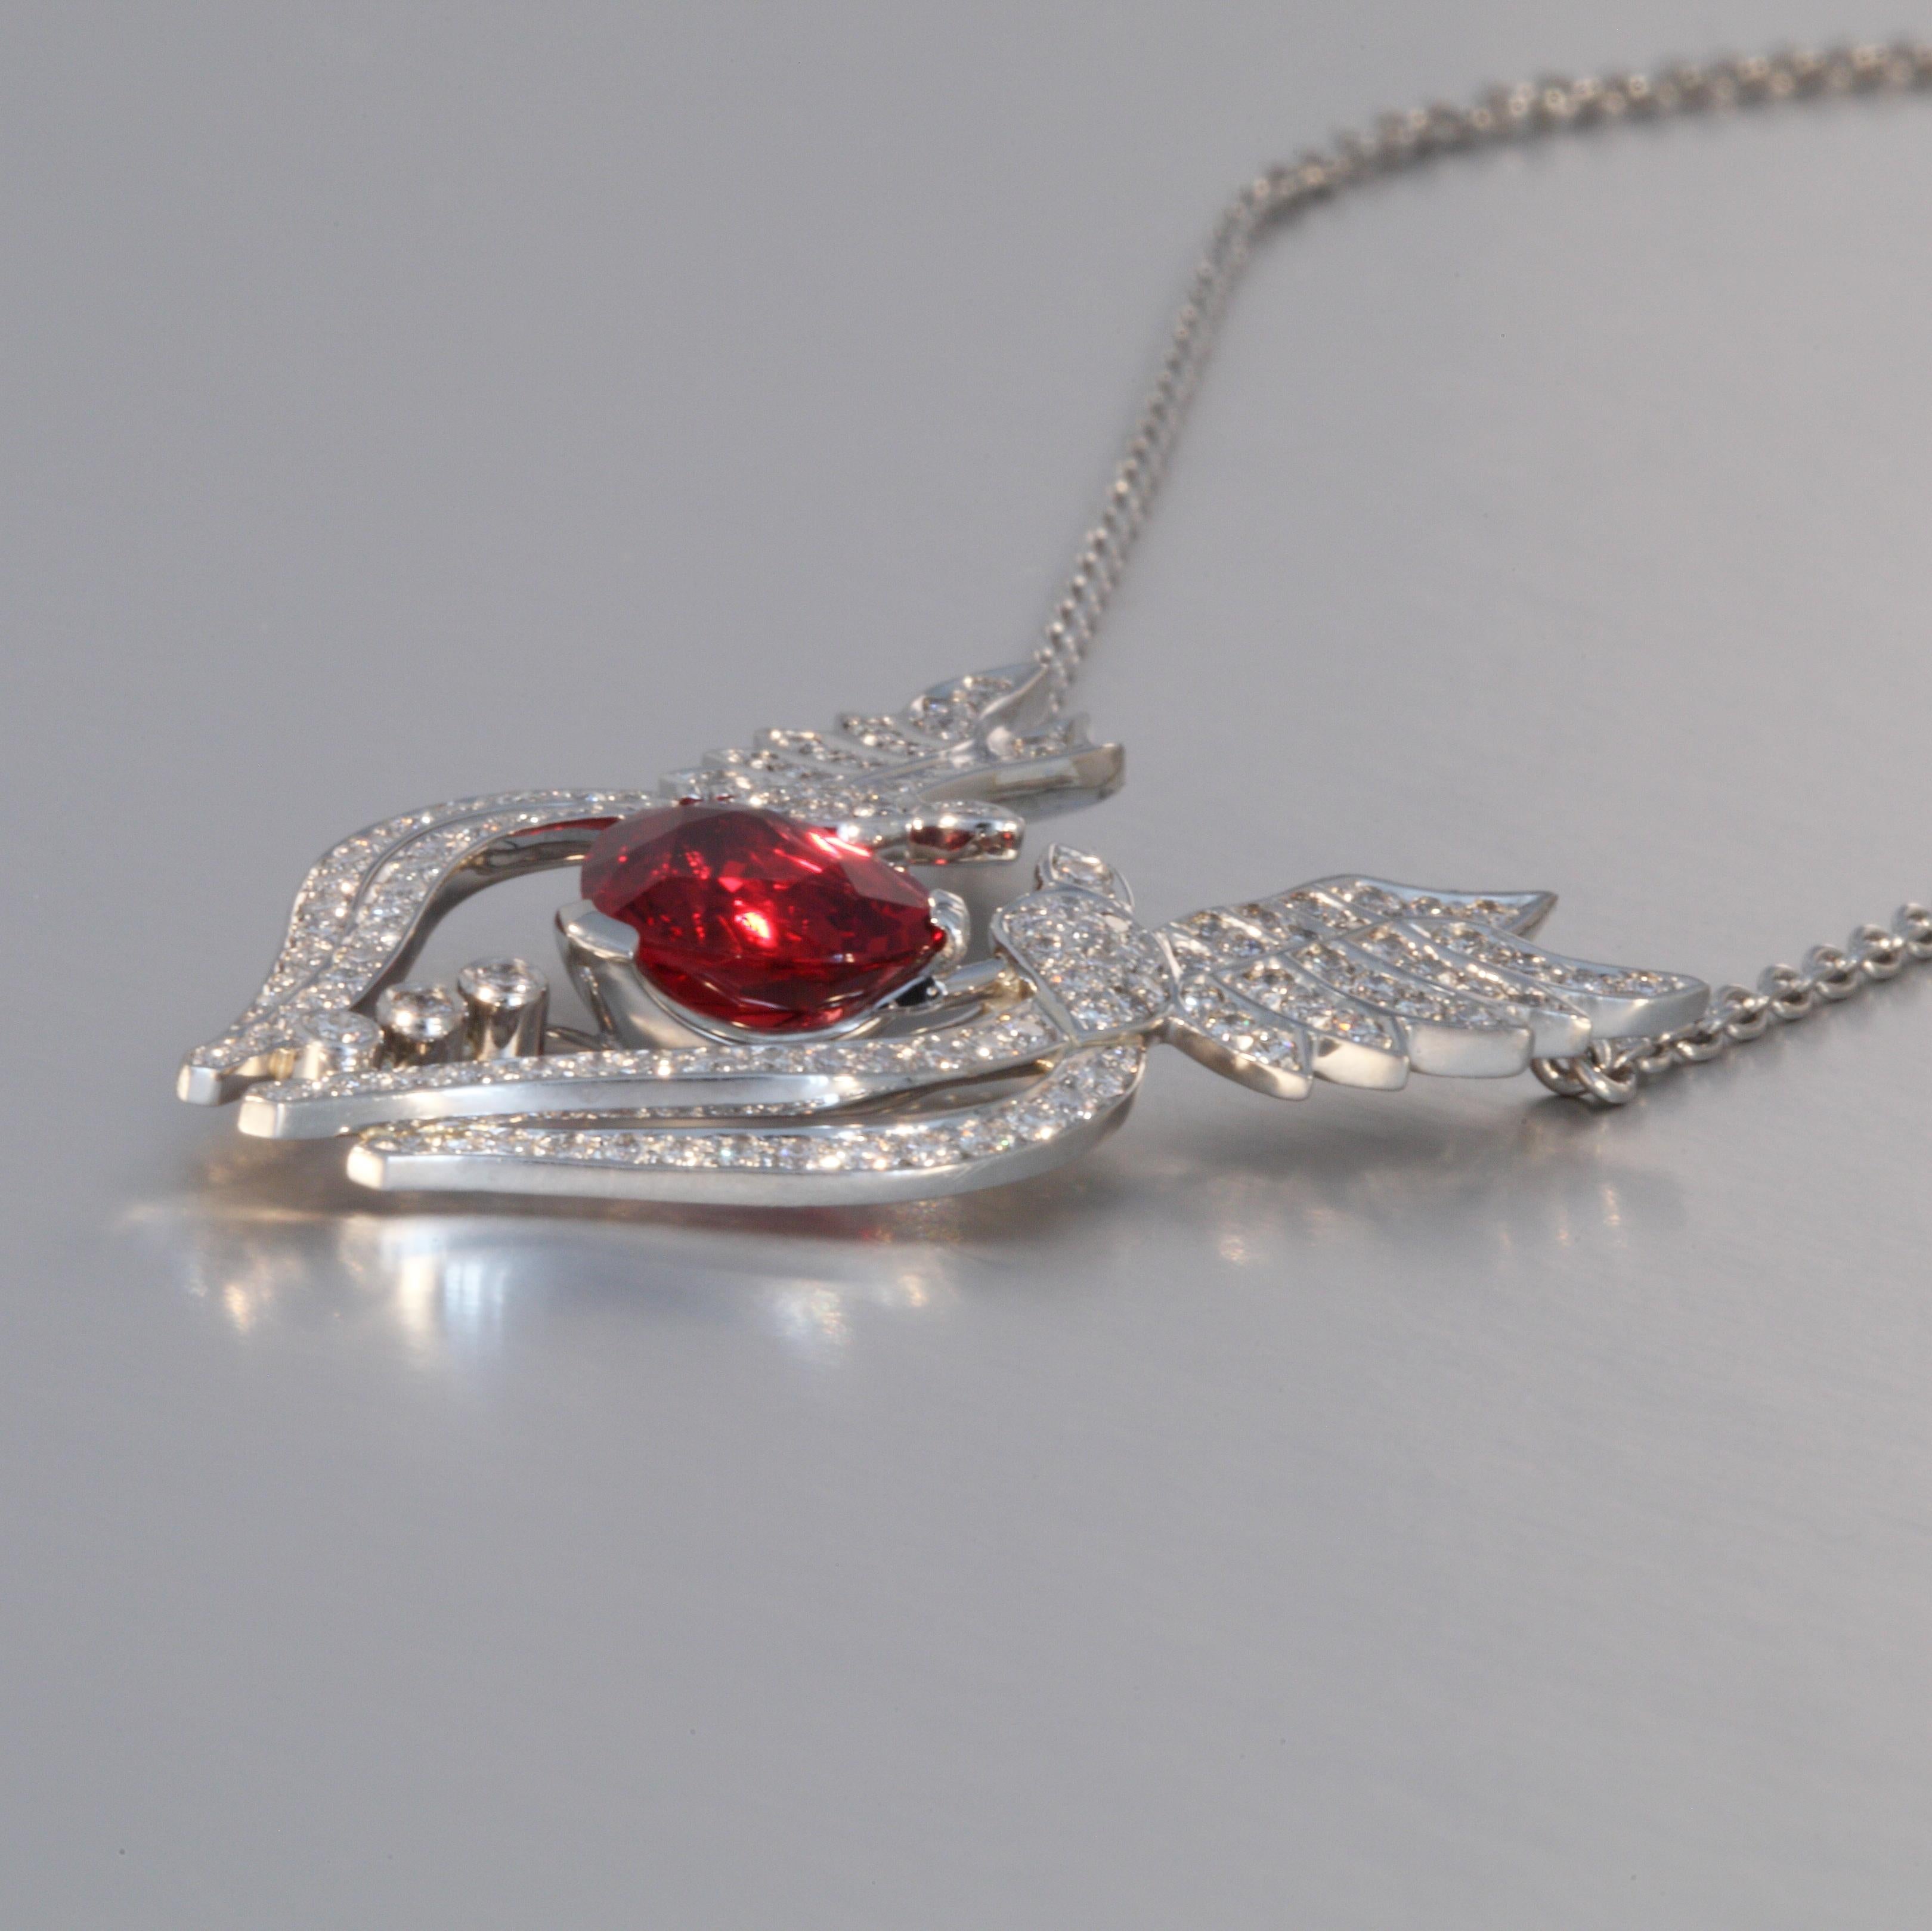 This platinum love bird pendant is set with a fine red Spinel heart 1.89 carats and 0.70 carats Diamonds F,G vvs on an attached chain. It is designed and hand made in Zurich, Switzerland by Robert Vogelsang and is a one of a kind piece signed